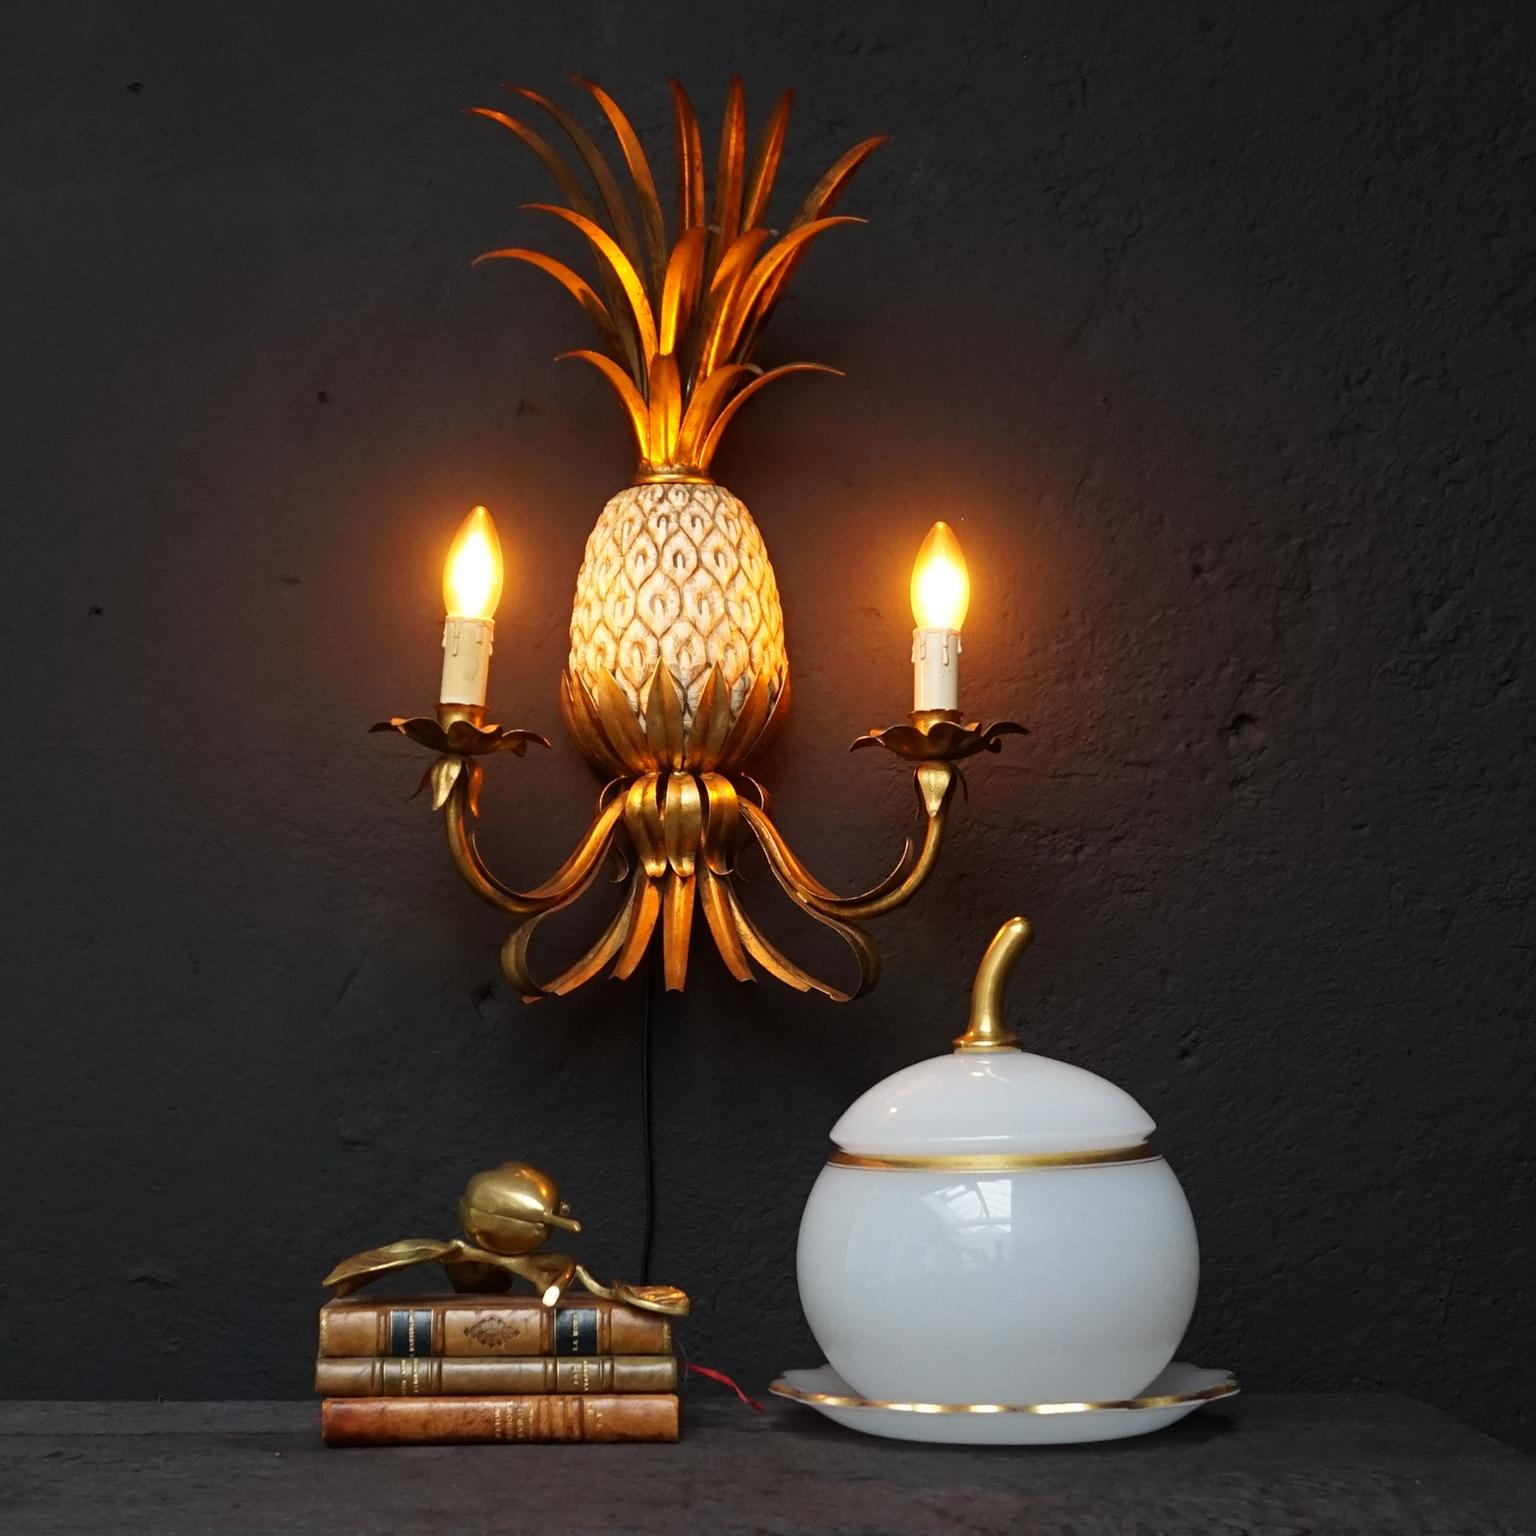 Mid-20th Century Midcentury French Hollywood Regency Pineapple Maison Charles Style Wall Sconce